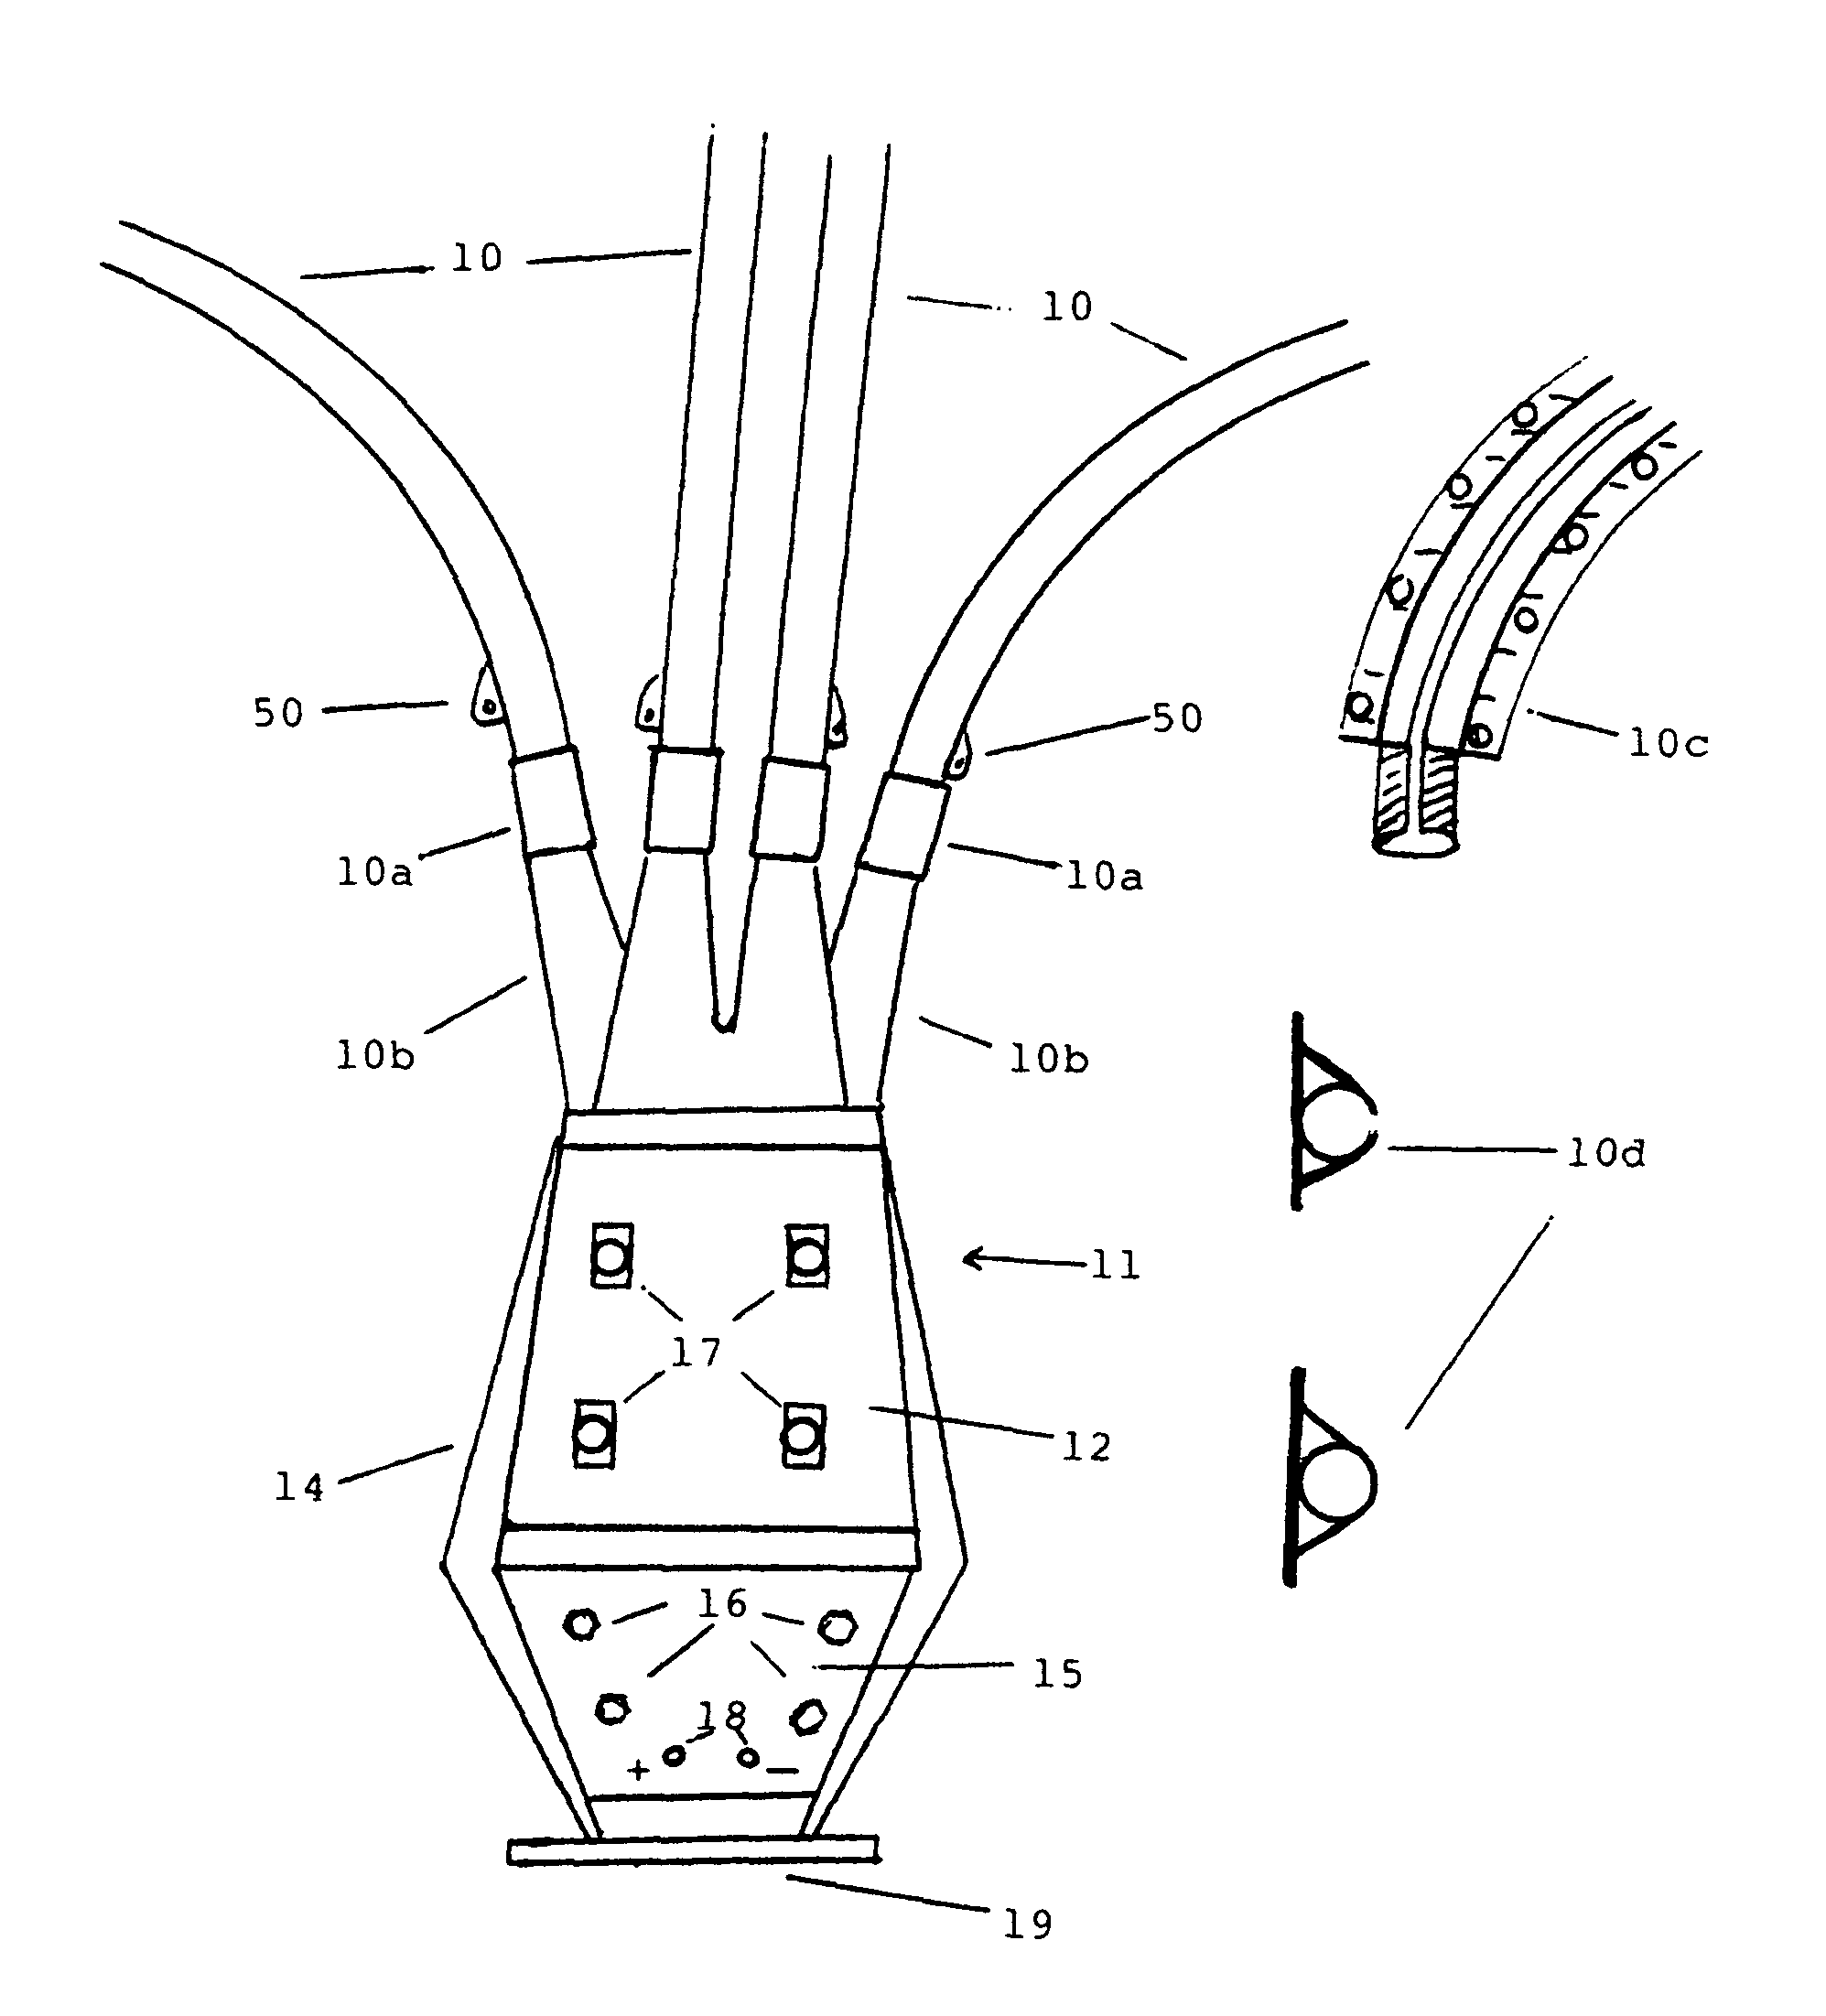 Multiple variable outlets shooting apparatus